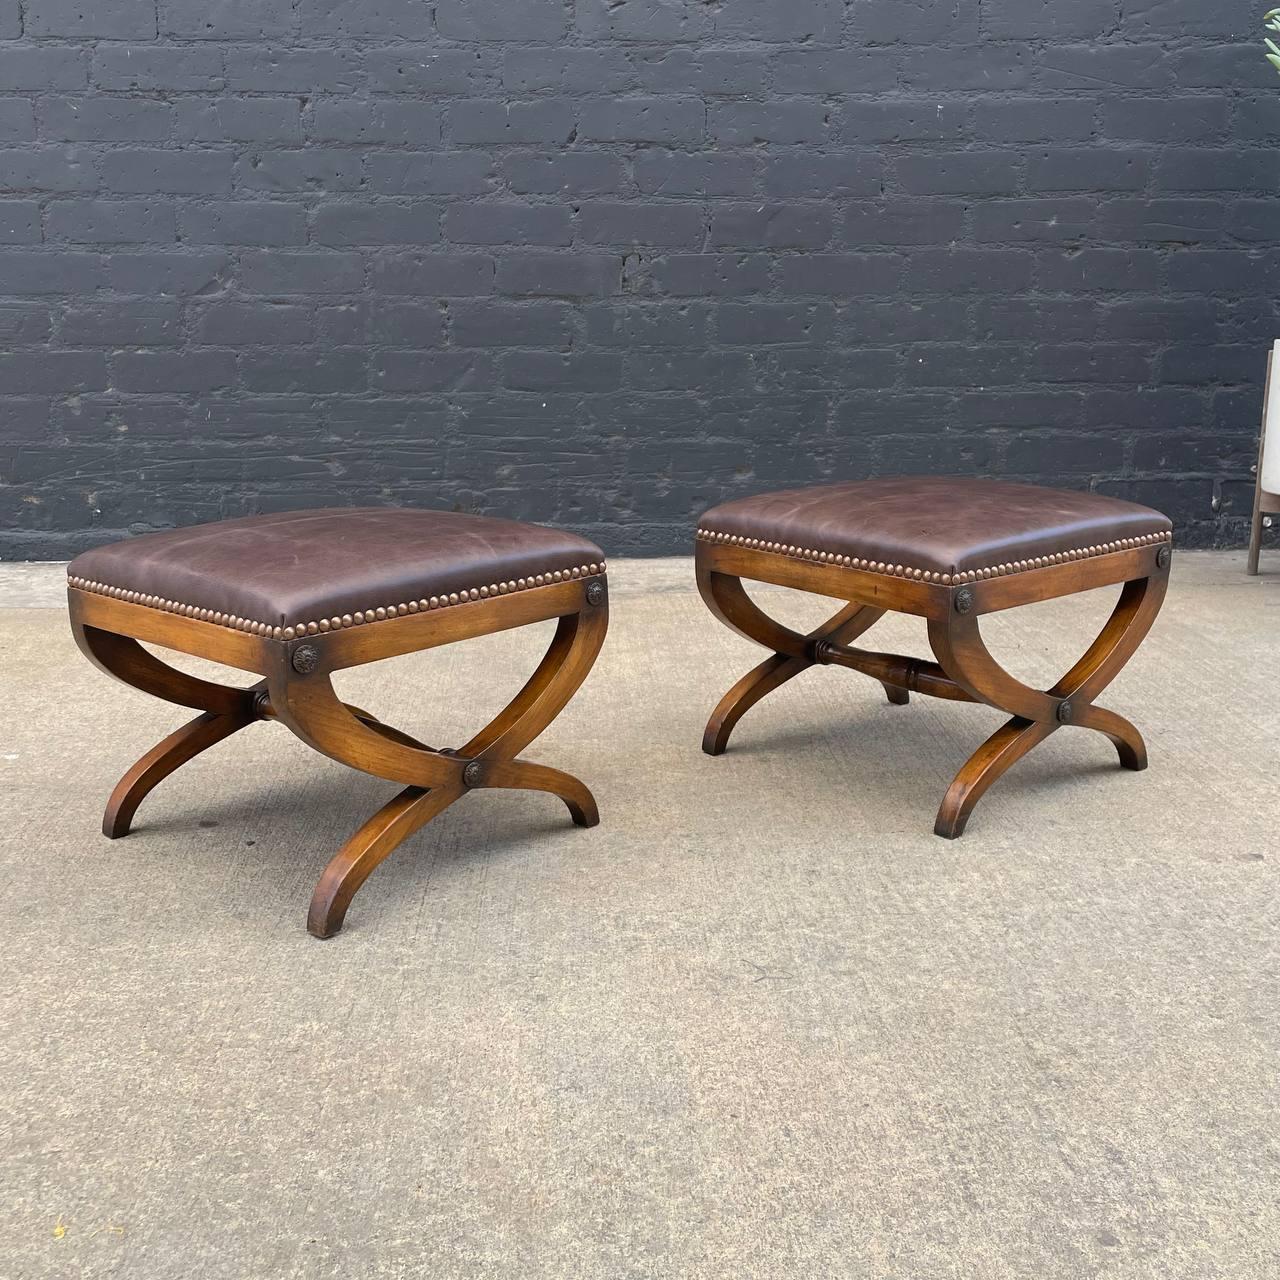 Pair of Neoclassical Style Curule Leather Benches

Country: Italy
Materials: Carved Wood, New Leather Upholstery 
Condition: Original Condition
Style: Italian Antique
Year: 1940’s

$1,895 pair 

Dimensions 
13.50”H x 16”W x 16”D.